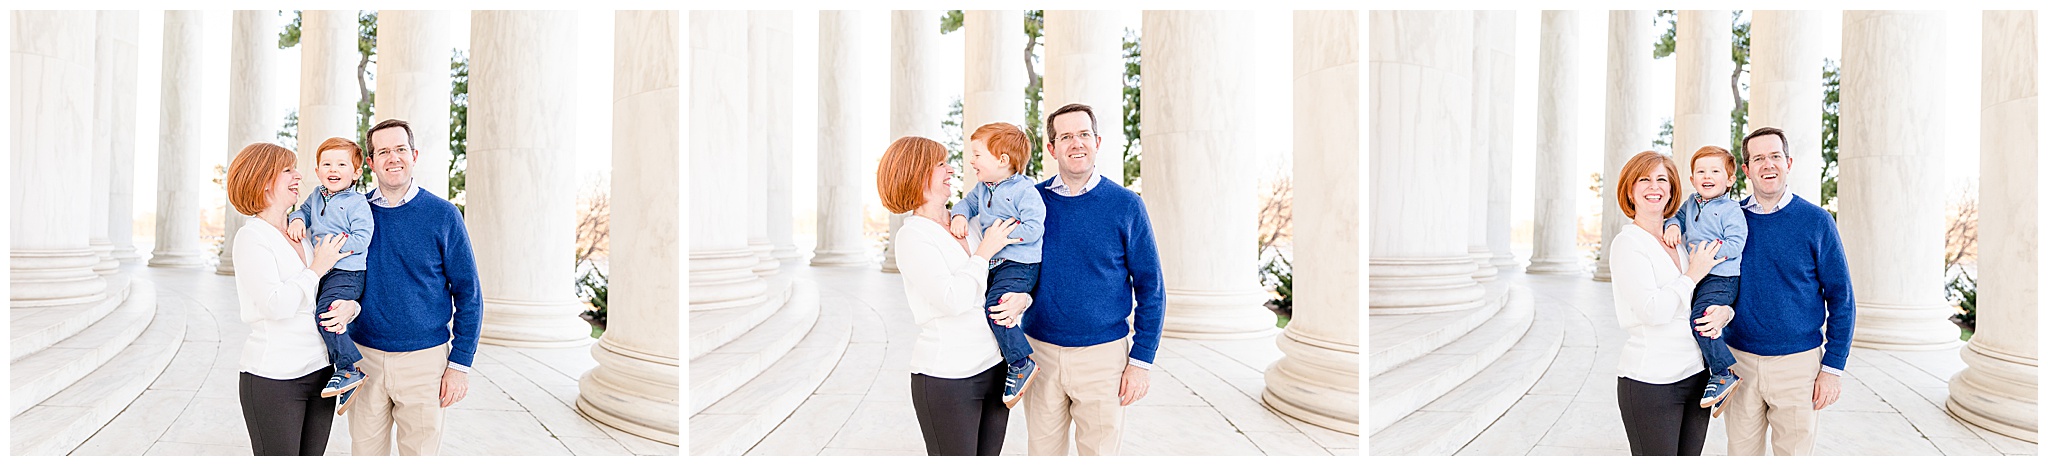 Family Photo Session at DC Memorials by Kofmehl Photography